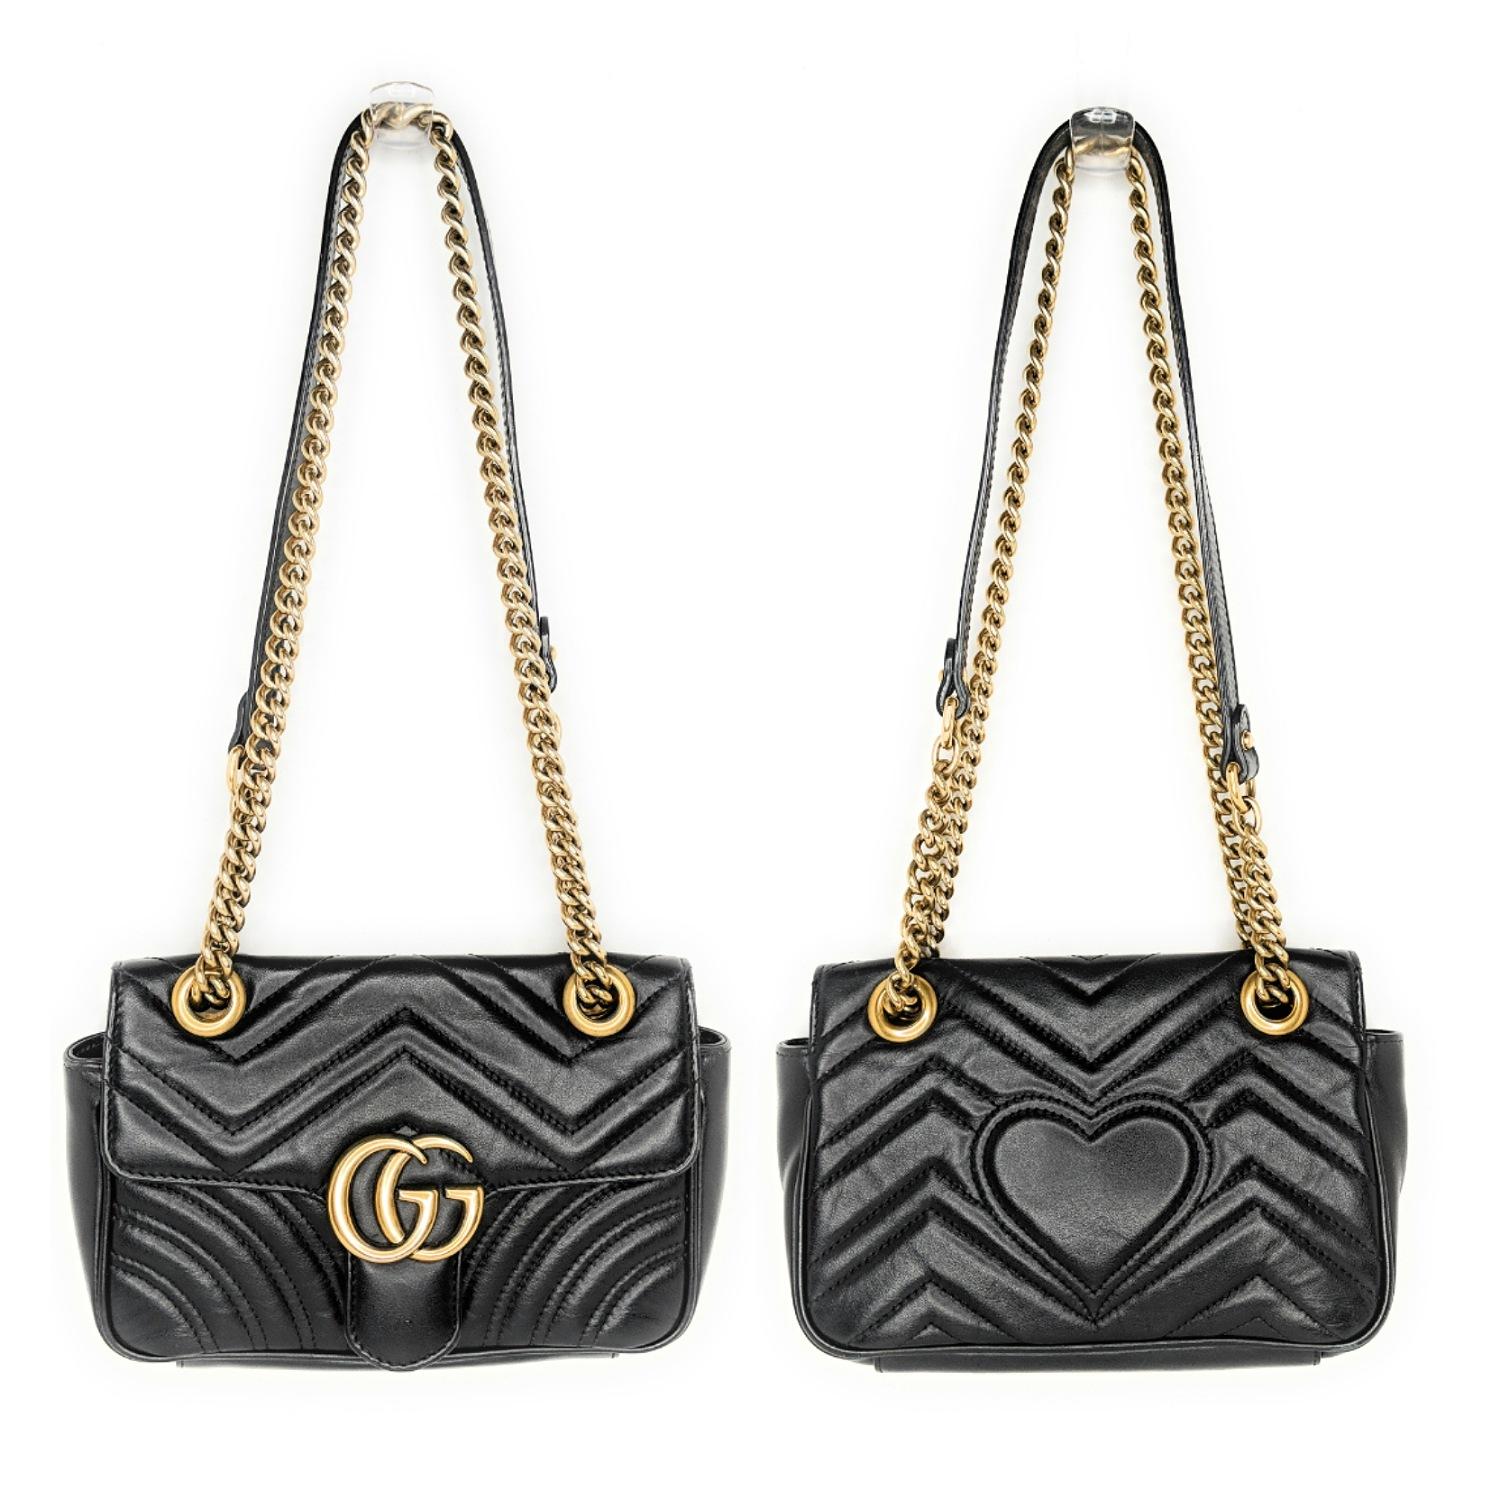 The mini GG Marmont flap bag has a softly structured shape and a flap closure with Double G hardware. The sliding chain strap can be worn multiple ways, changing between a shoulder and a top handle bag. Made in matelassé chevron leather with a heart